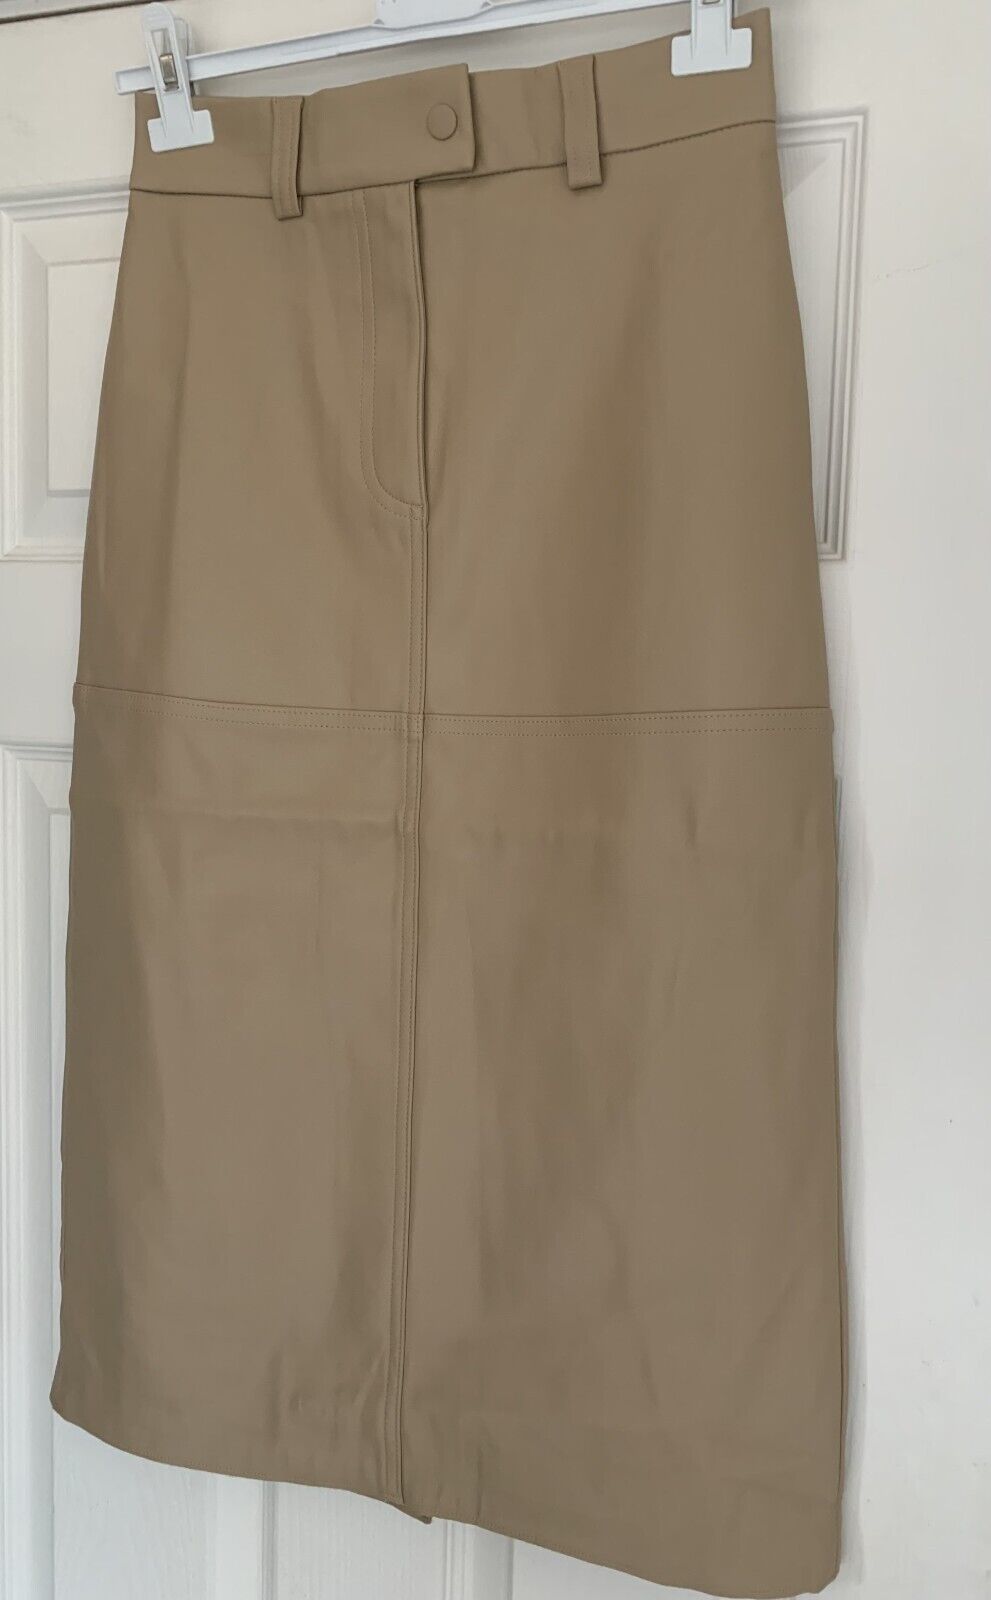 EX M*S Beige Unlined Faux Leather A-Line Skirt Sizes 6 8 10 12 14 16 20 RRP £35